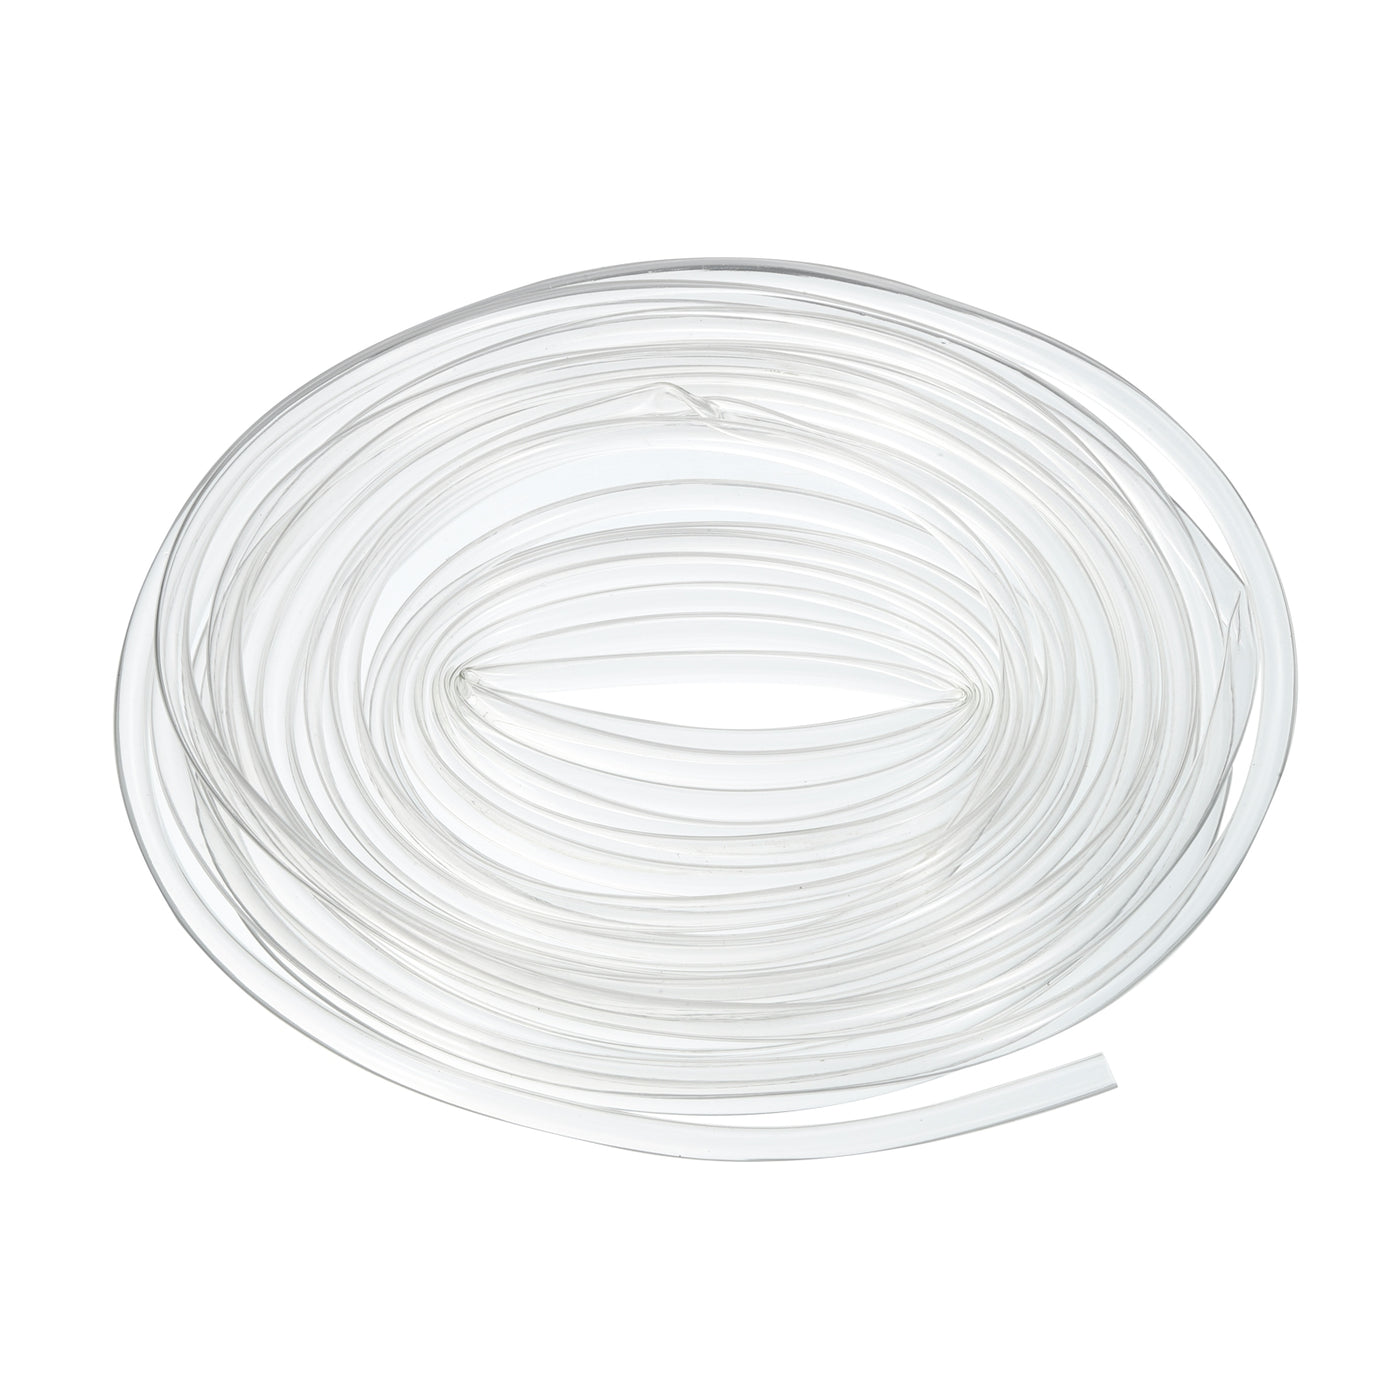 uxcell Uxcell Clear PVC Tube Wire Harness Tubing, 3/16-inch(5mm) ID 23ft Sleeve for Wire Sheathing Wire Protection